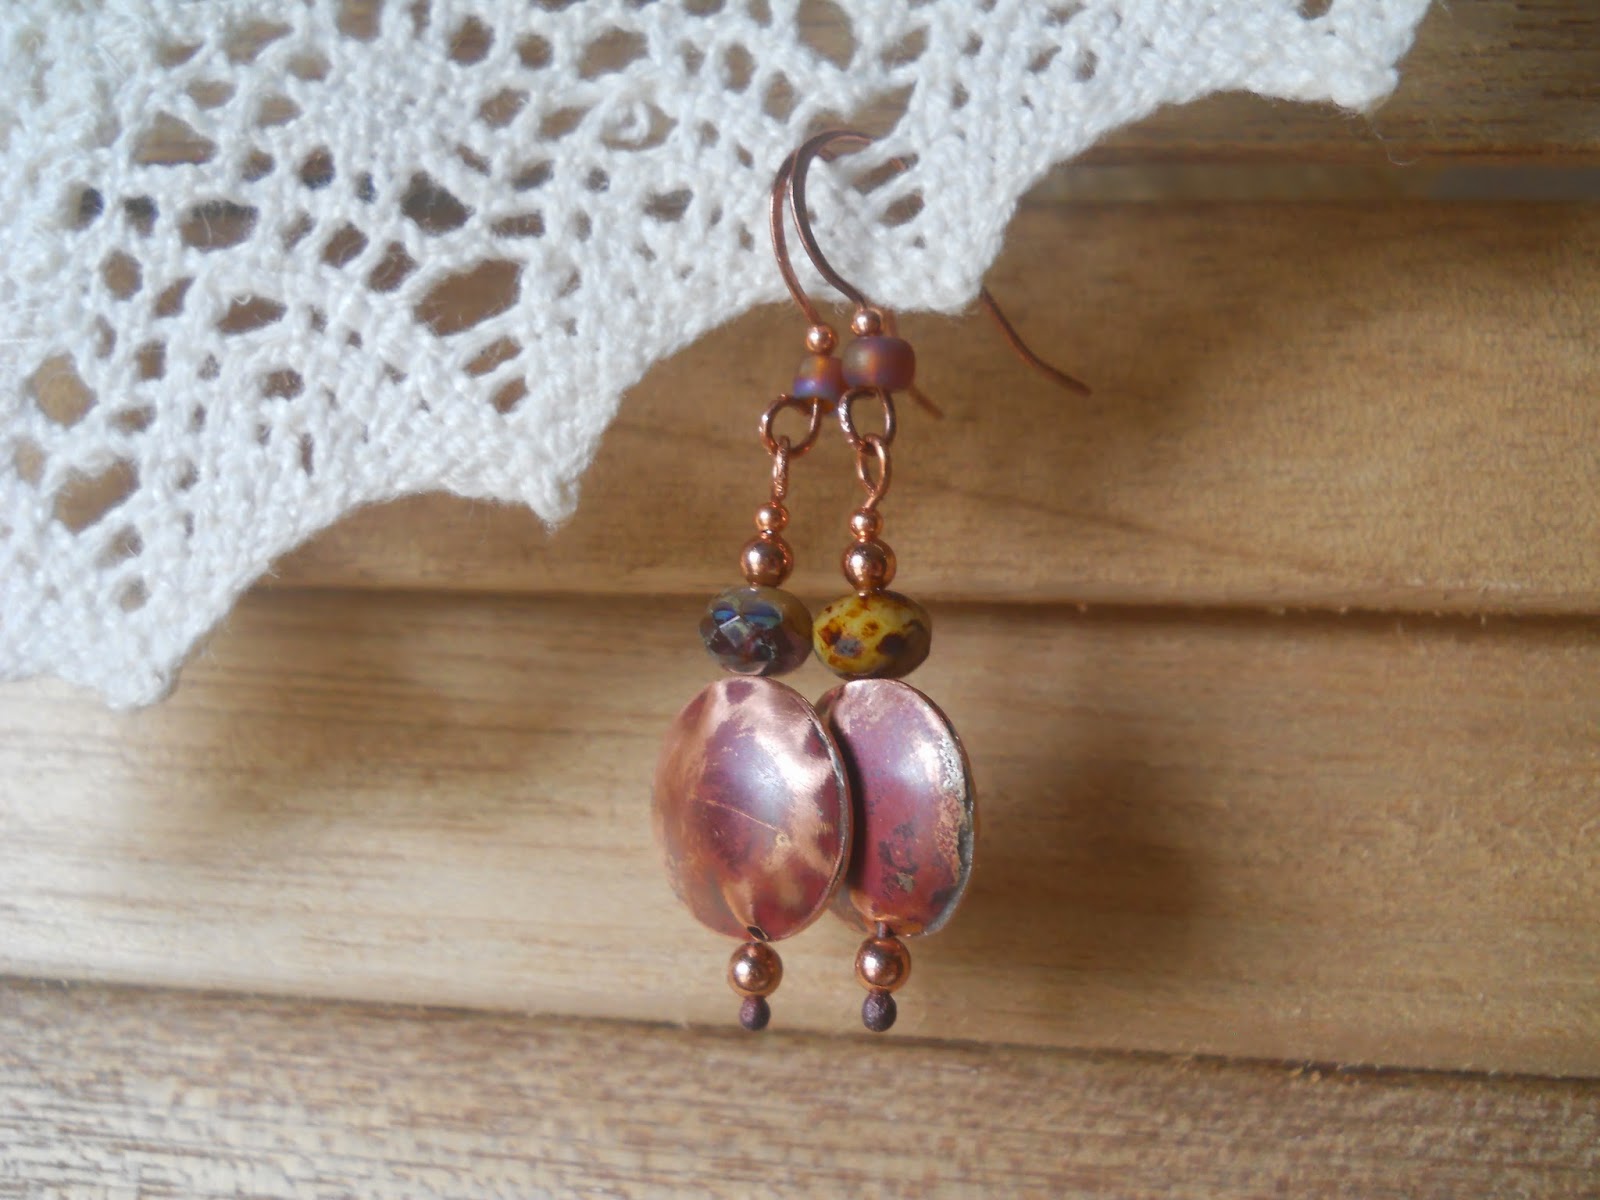 hand crafted hollow bead earrings by wind dancer studios on Etsy